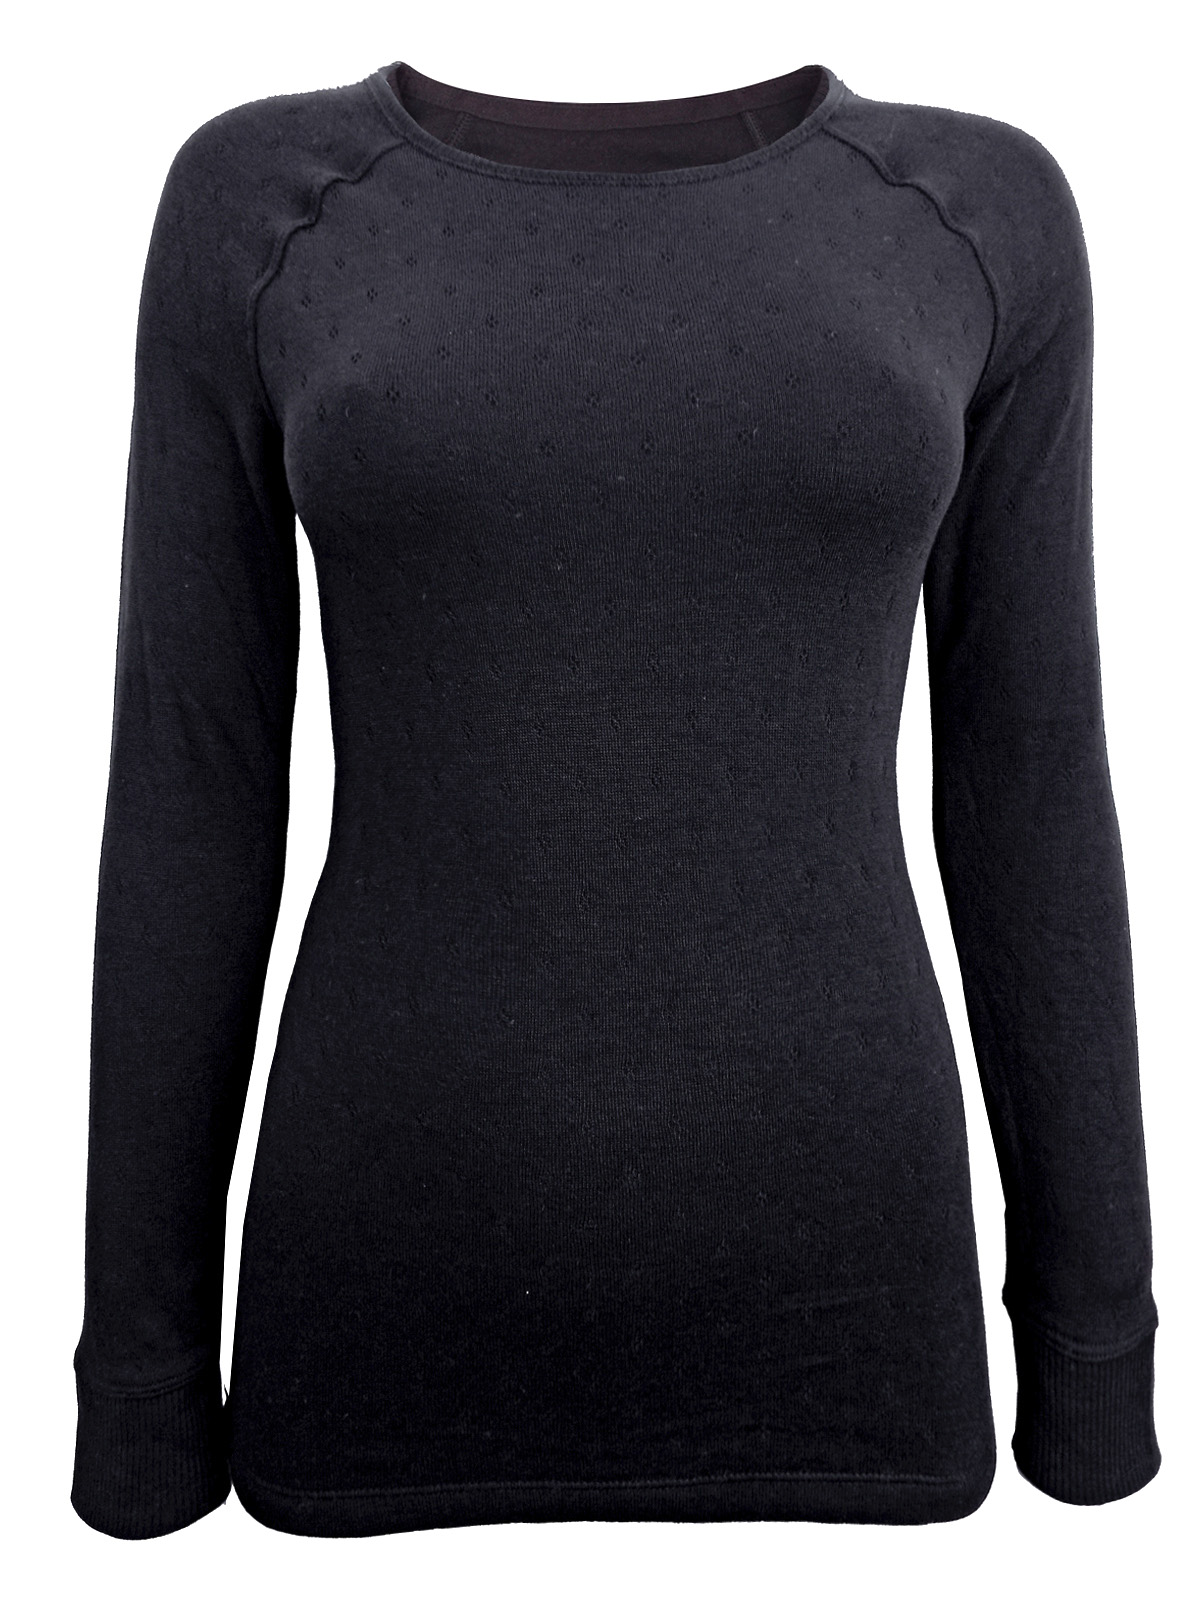 Marks and Spencer - - M&5 Thermal PLUS BLACK Long Sleeve Ribbed Cuffs ...